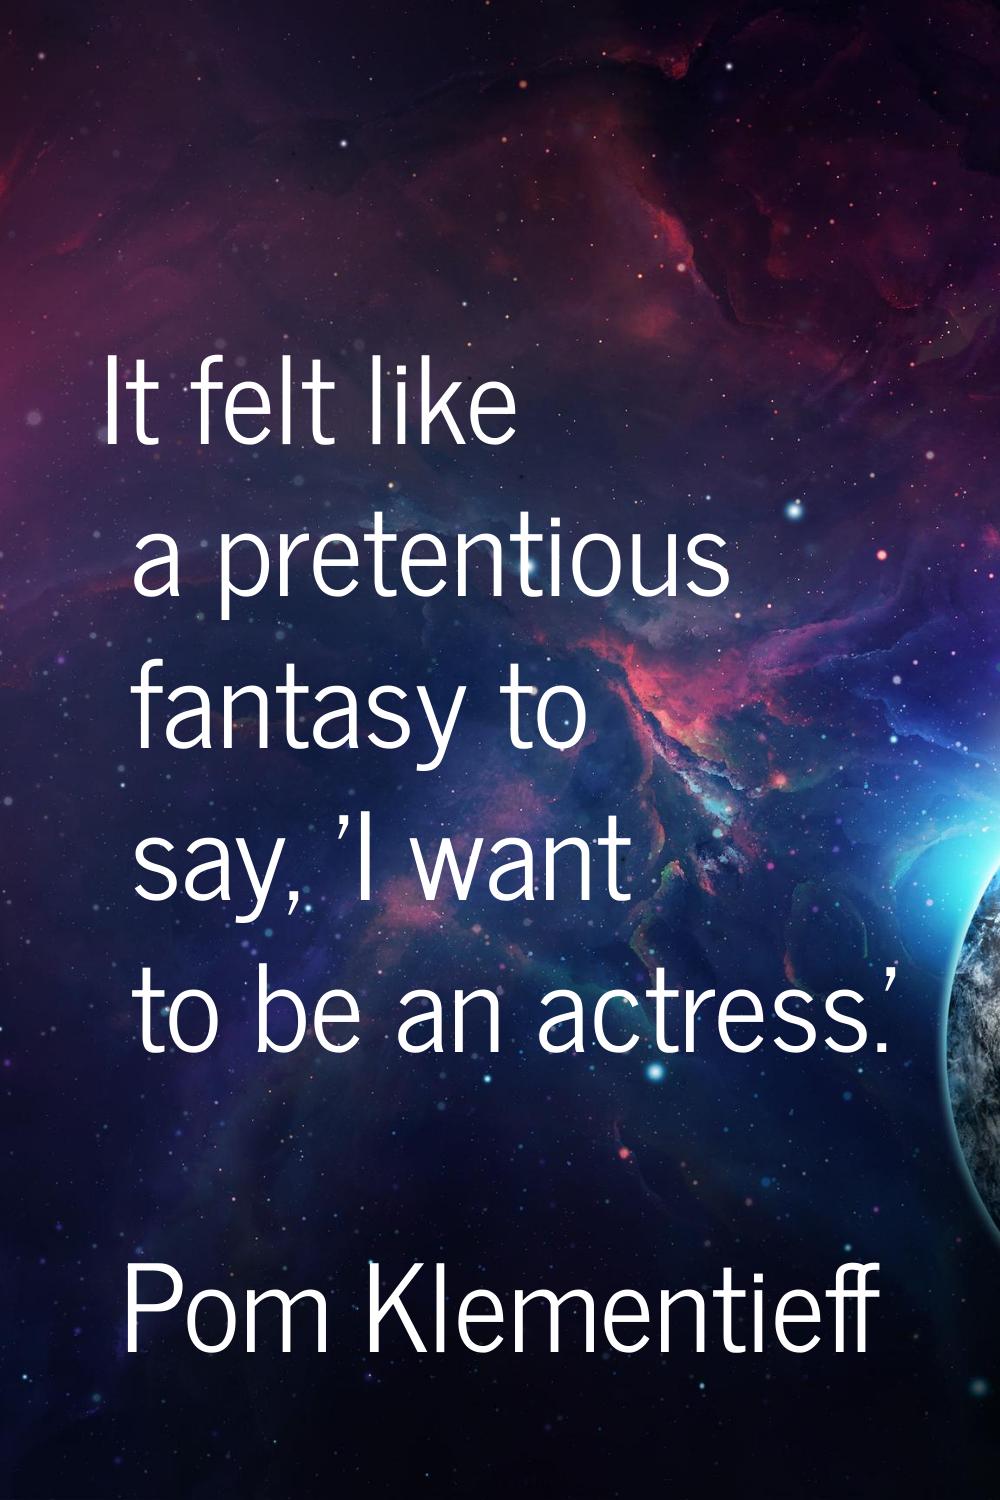 It felt like a pretentious fantasy to say, 'I want to be an actress.'